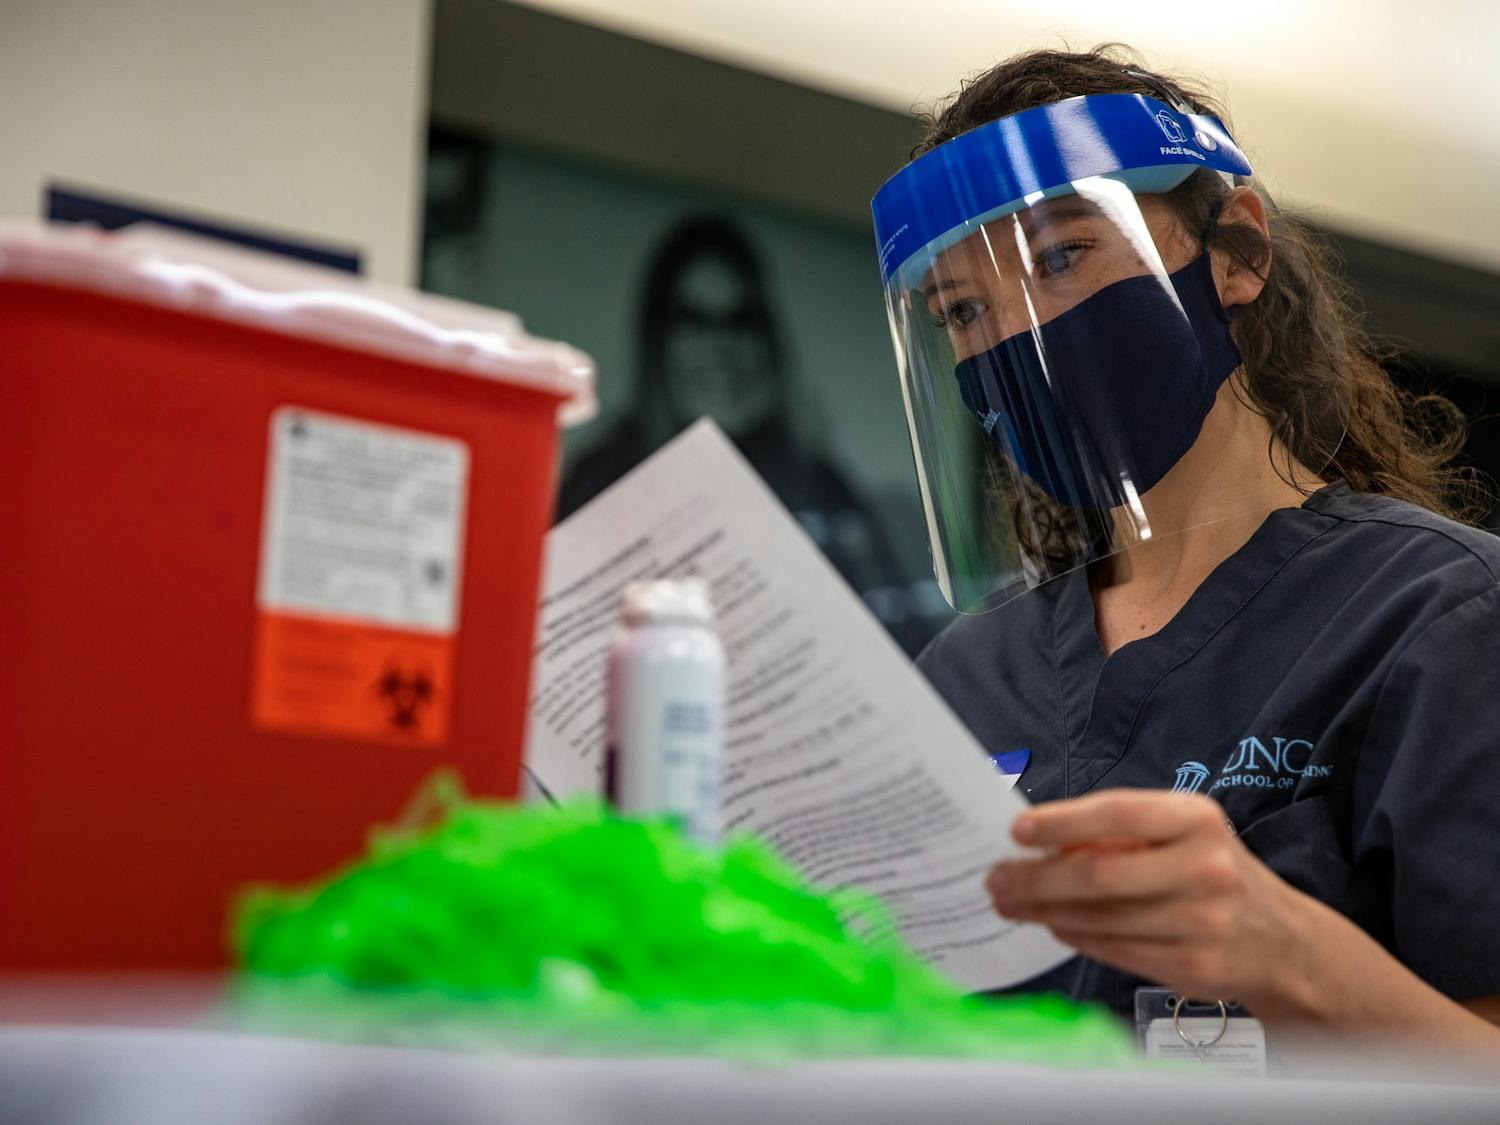 A vaccine administrator reads an information packet in the Student Union on March 31, 2021. As North Carolina began to allow college students to receive coronavirus vaccines, UNC opened a clinic on campus where students can receive the Johnson & Johnson vaccine.